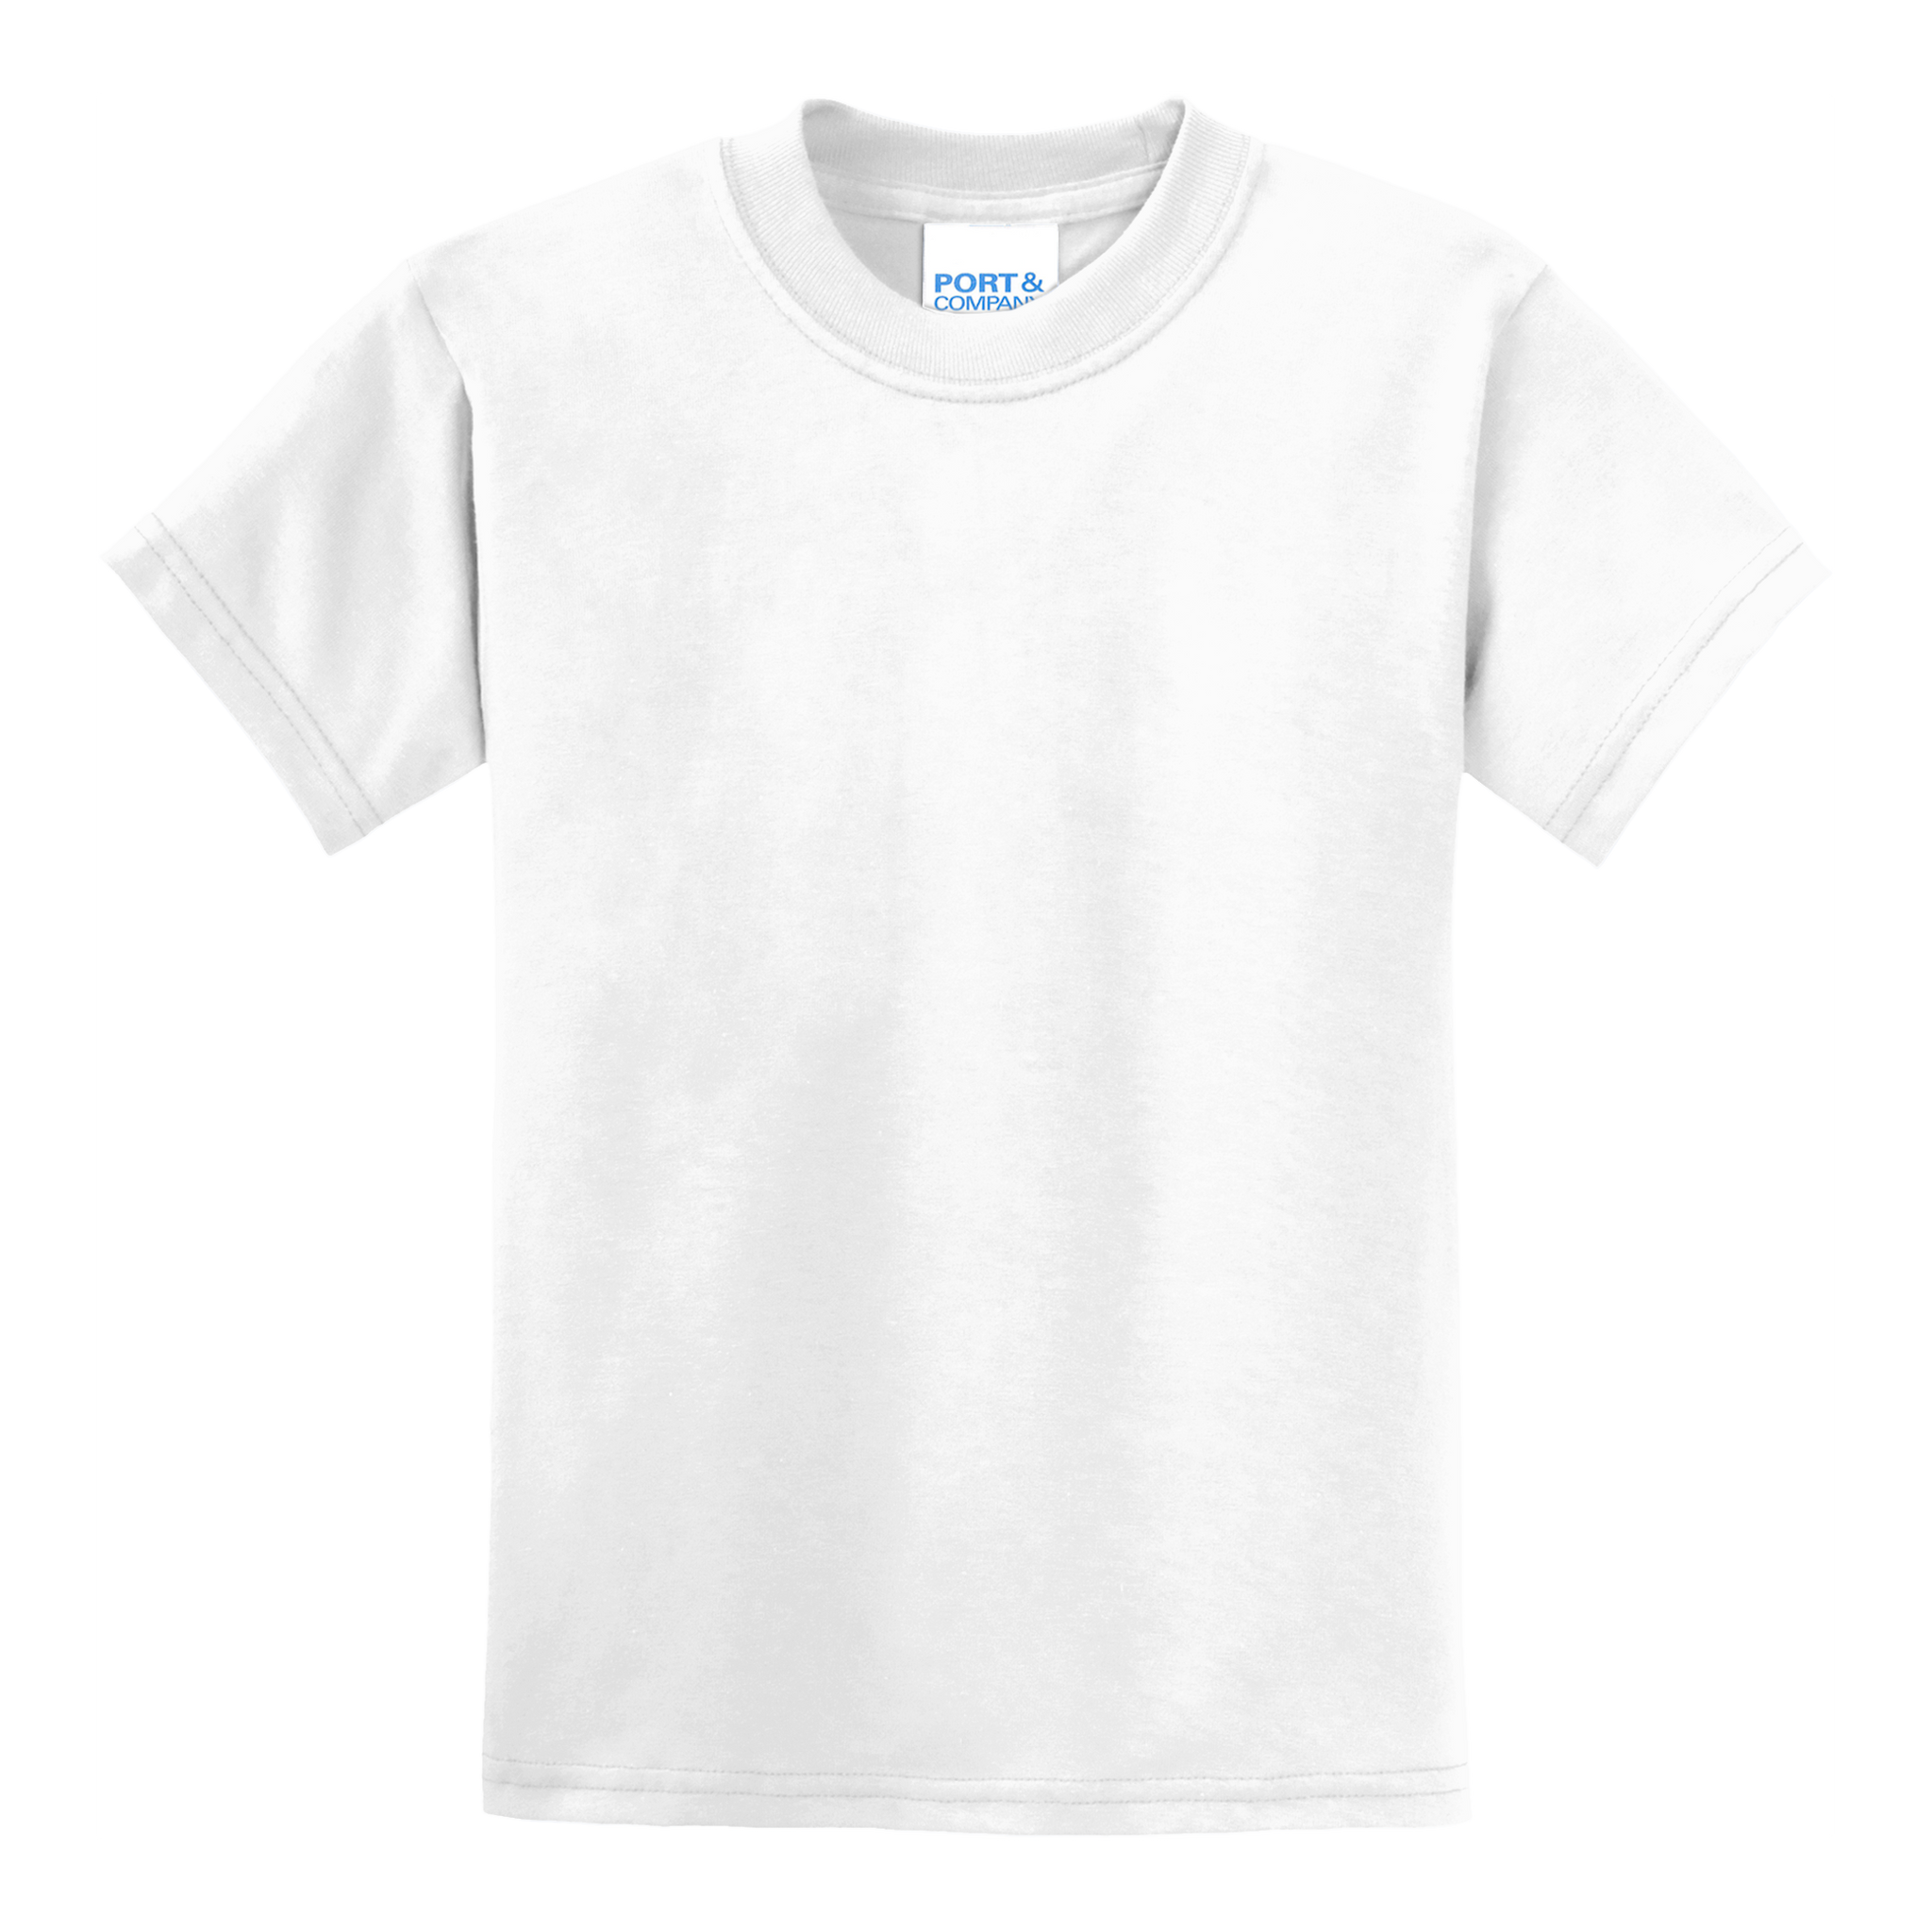 AY1901 Youth Core Blend Tee